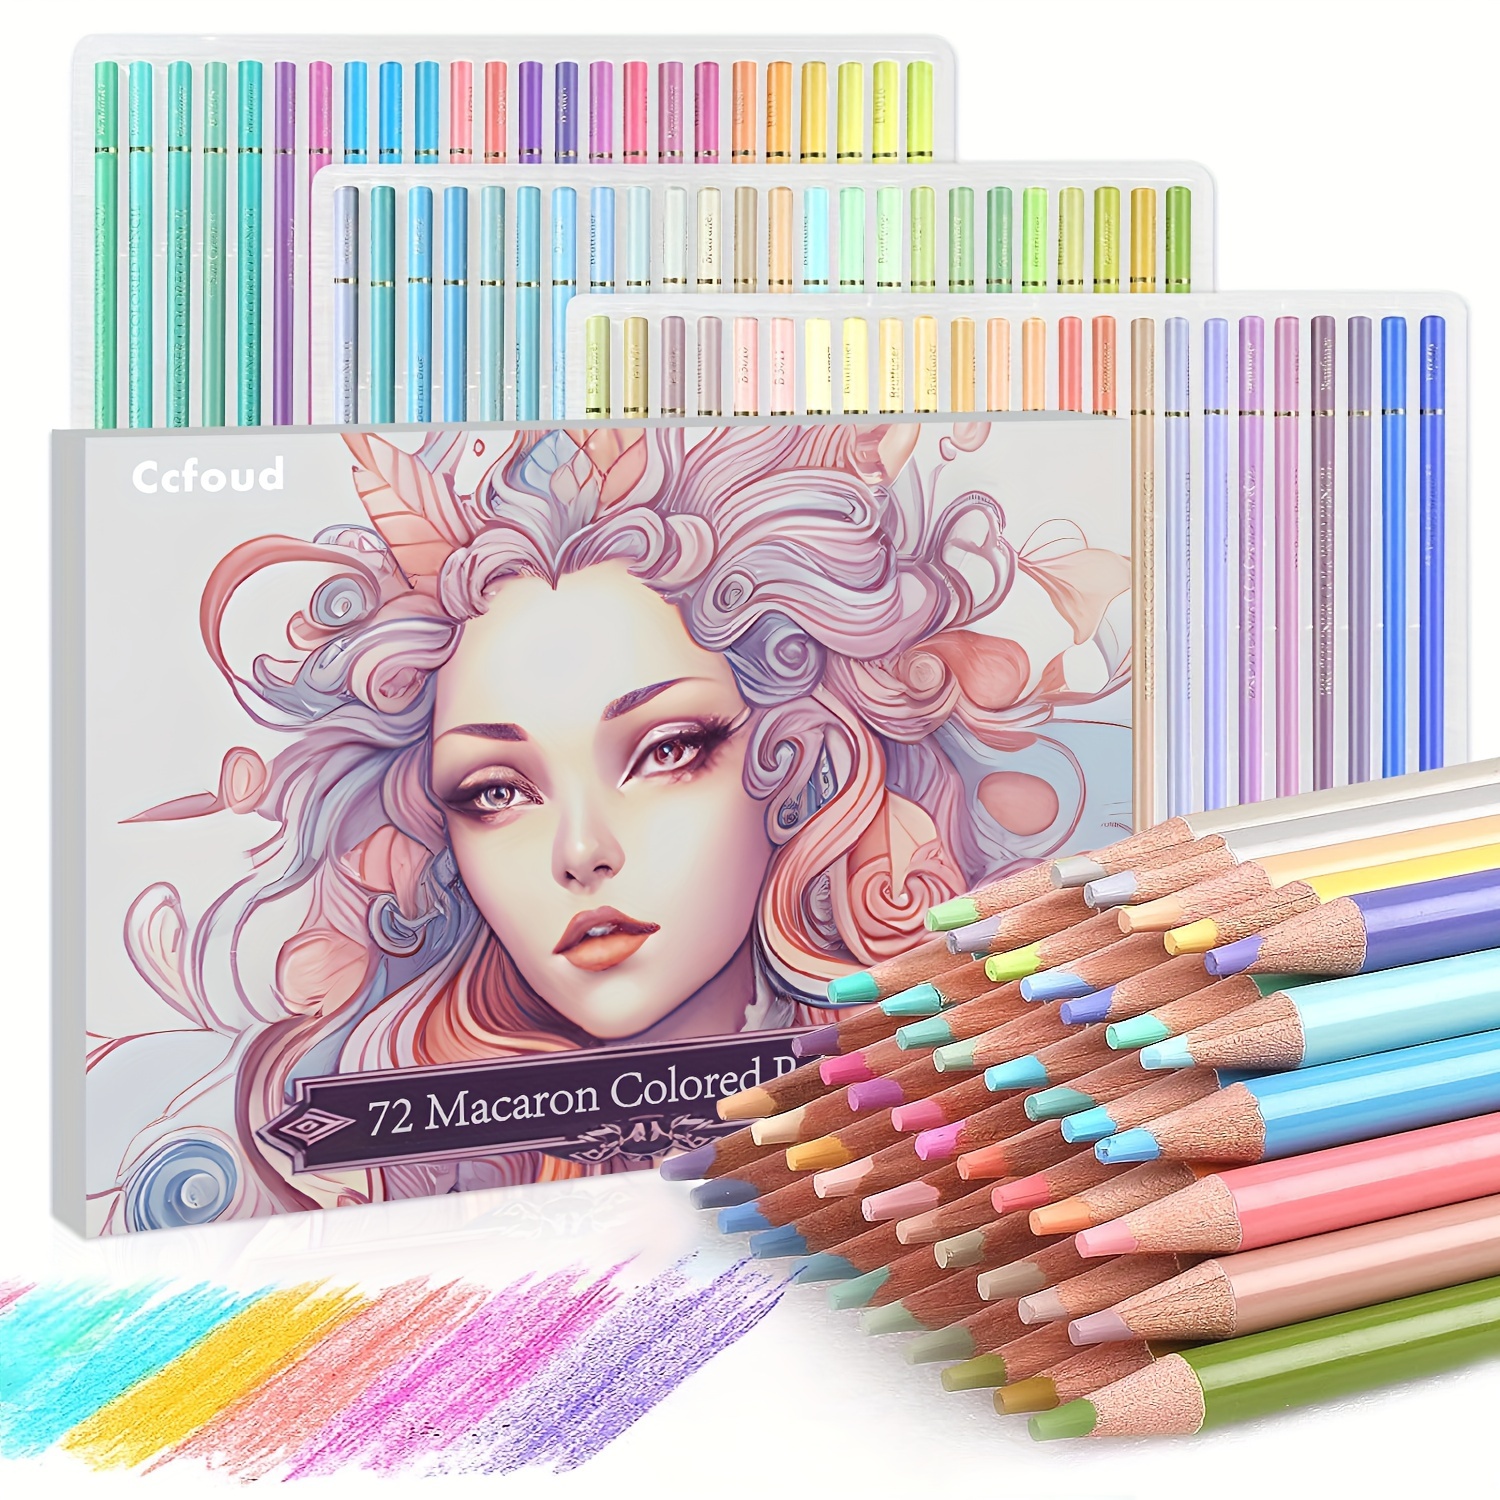 Swatch Form: Brutfuner Colored Pencils 120pc. Round plastic Carry